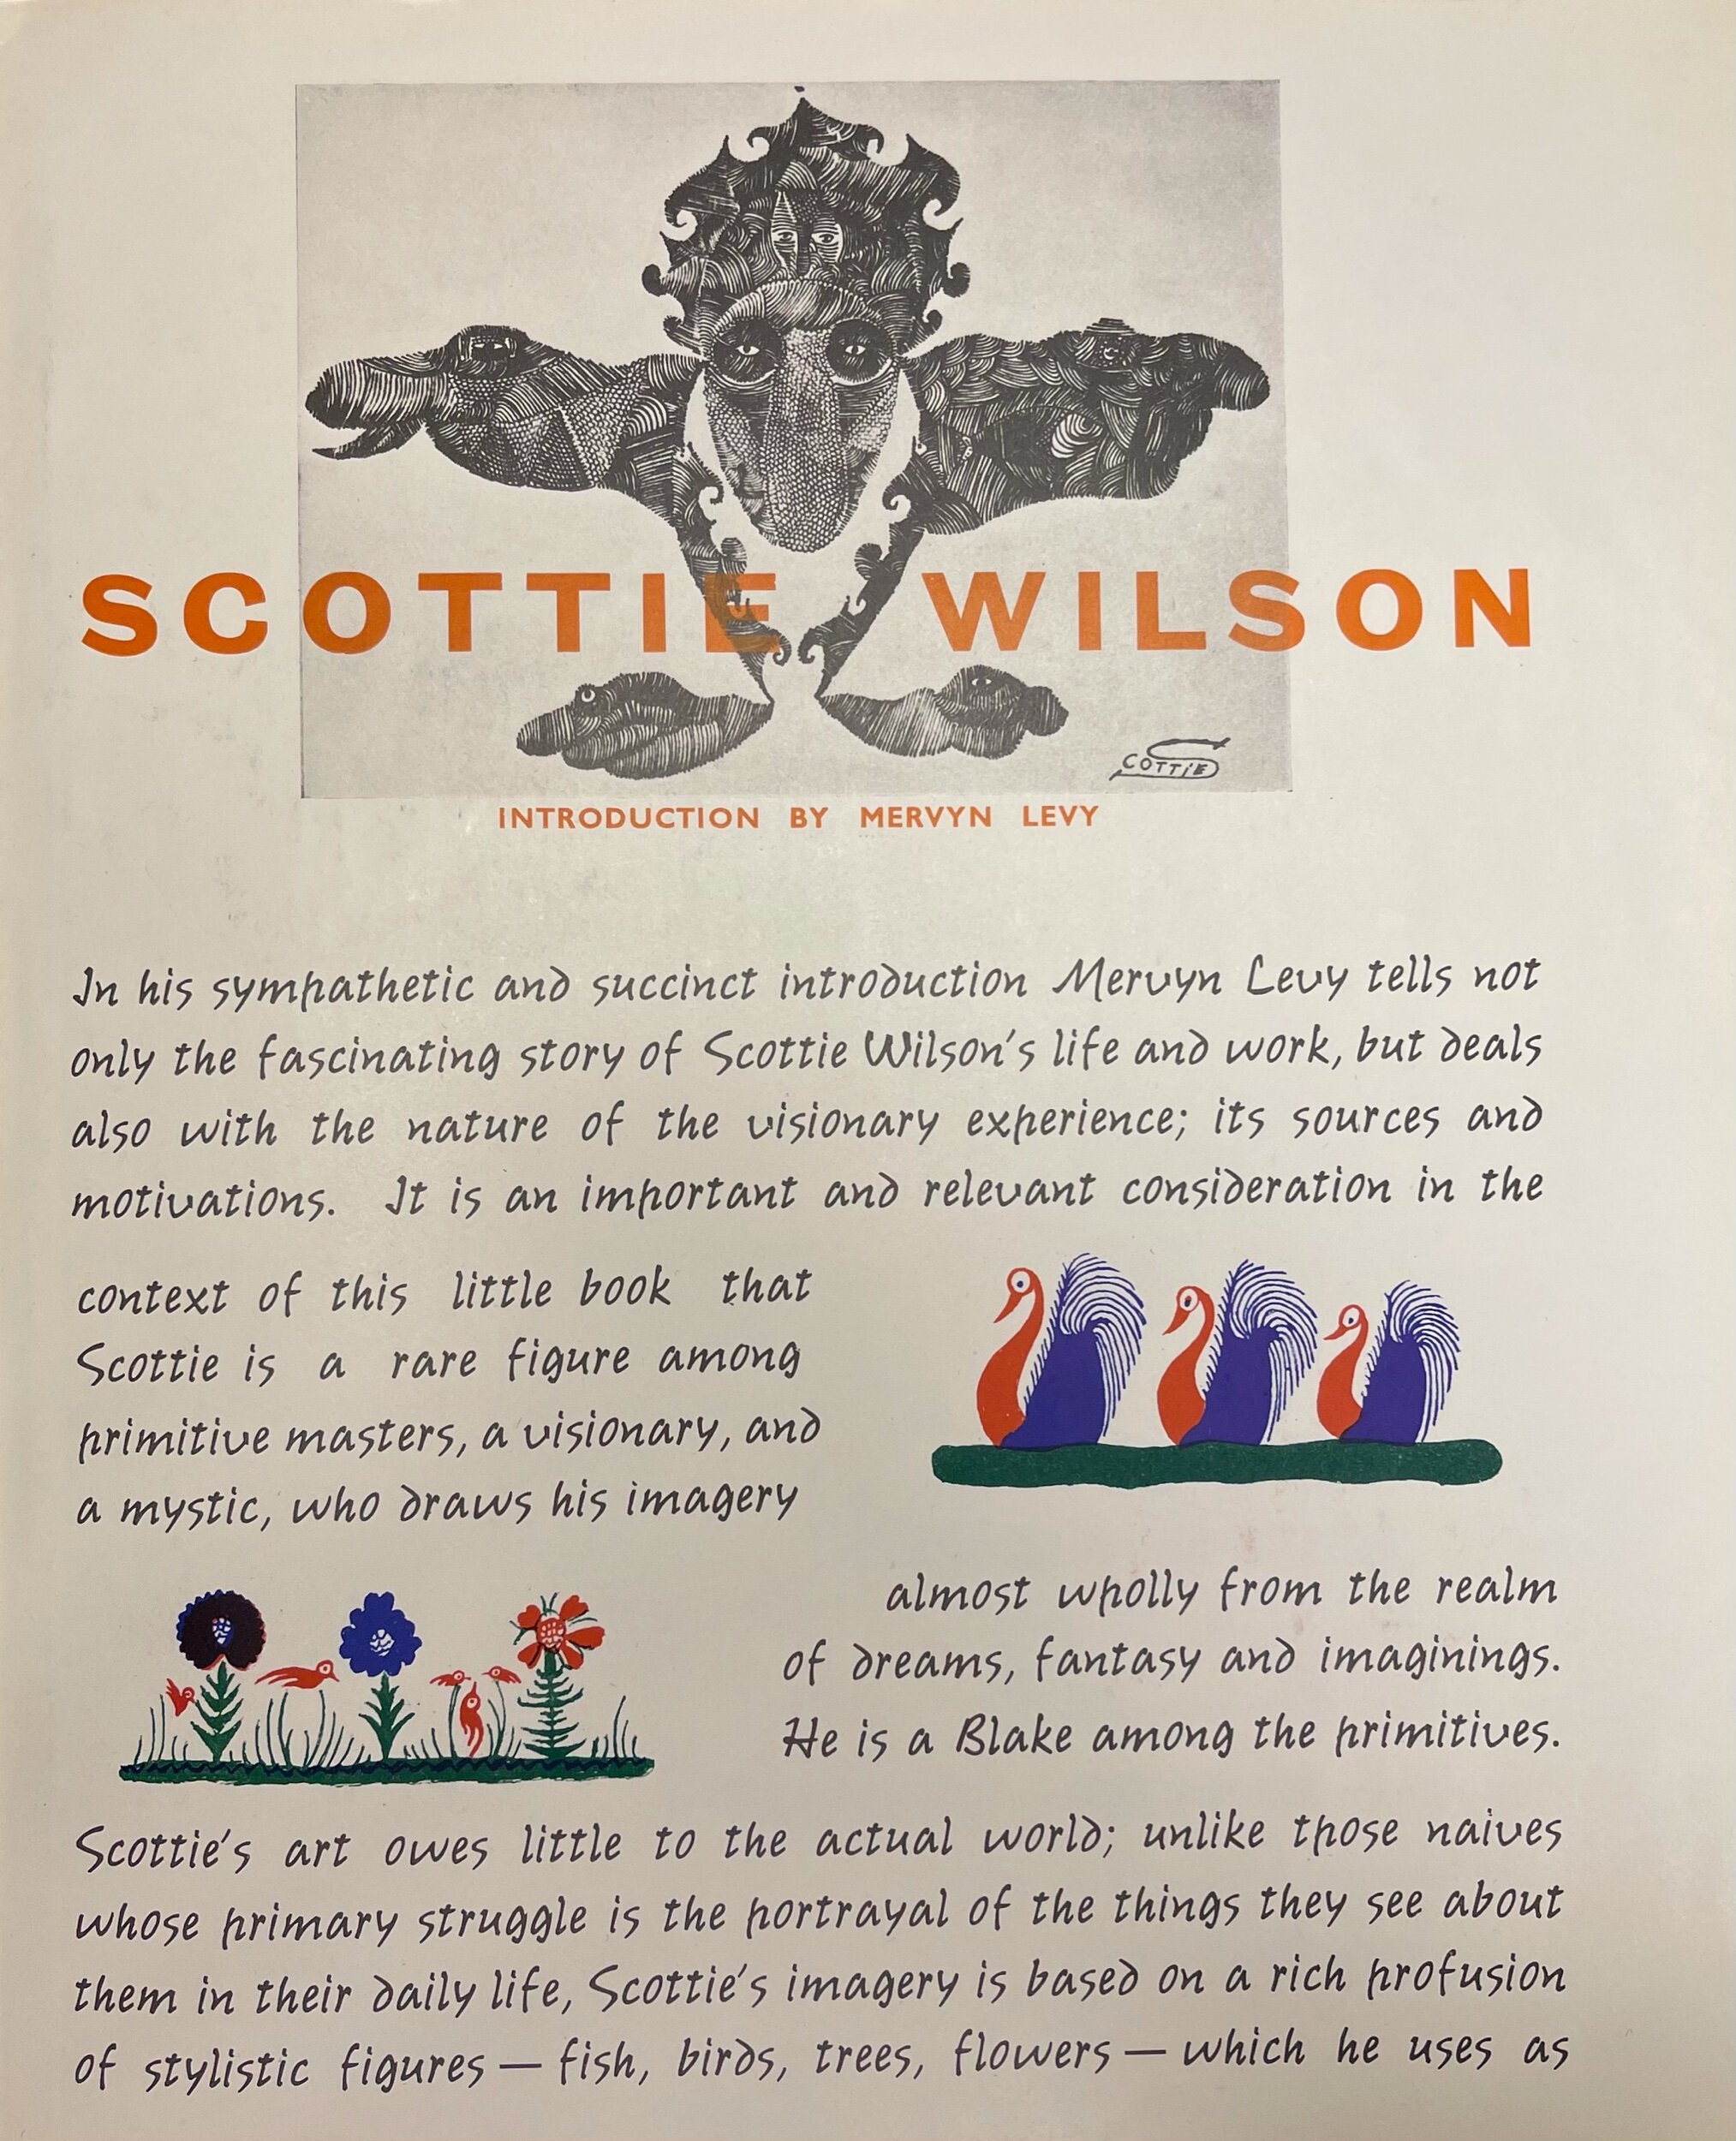 Brook Street Gallery catalogue from Wilson's solo exhibition.